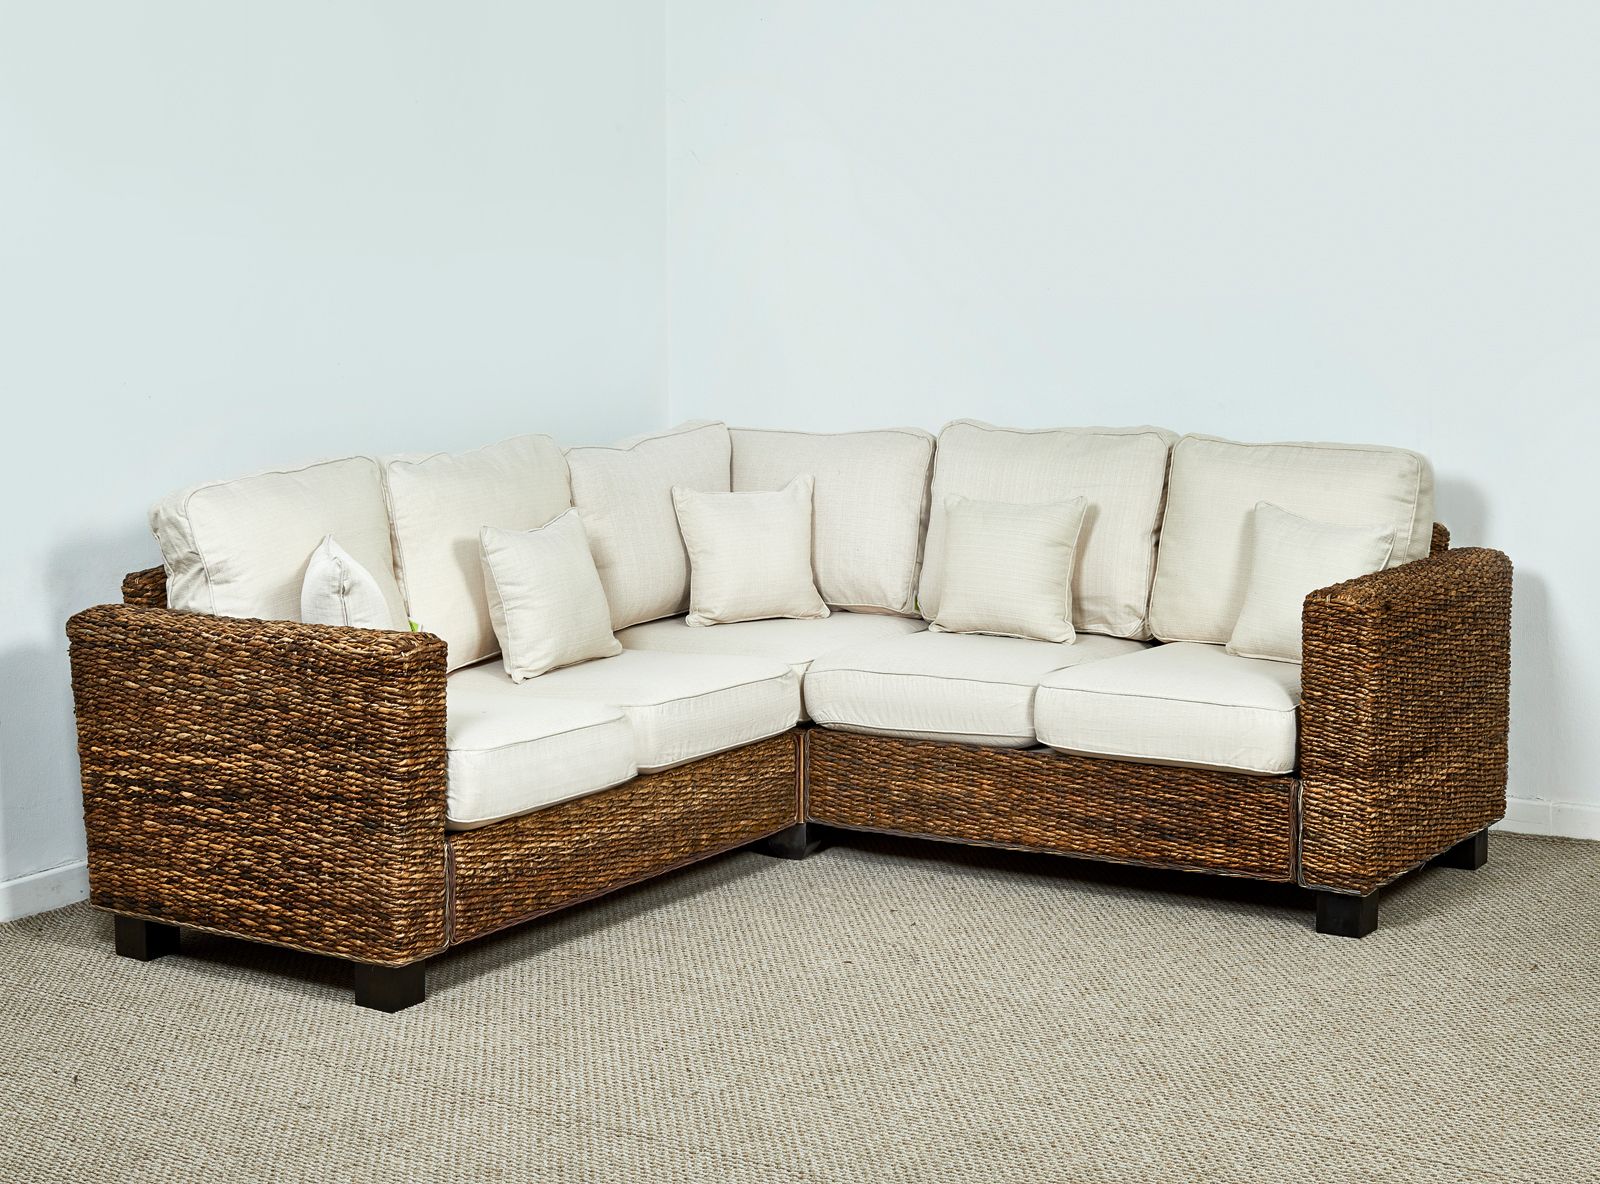 Widely Used Rustic Brown Sectional Corner Desks Inside Natural Rattan Conservatory Corner Sofa In Oatmeal – Kensington Abaca (View 3 of 15)